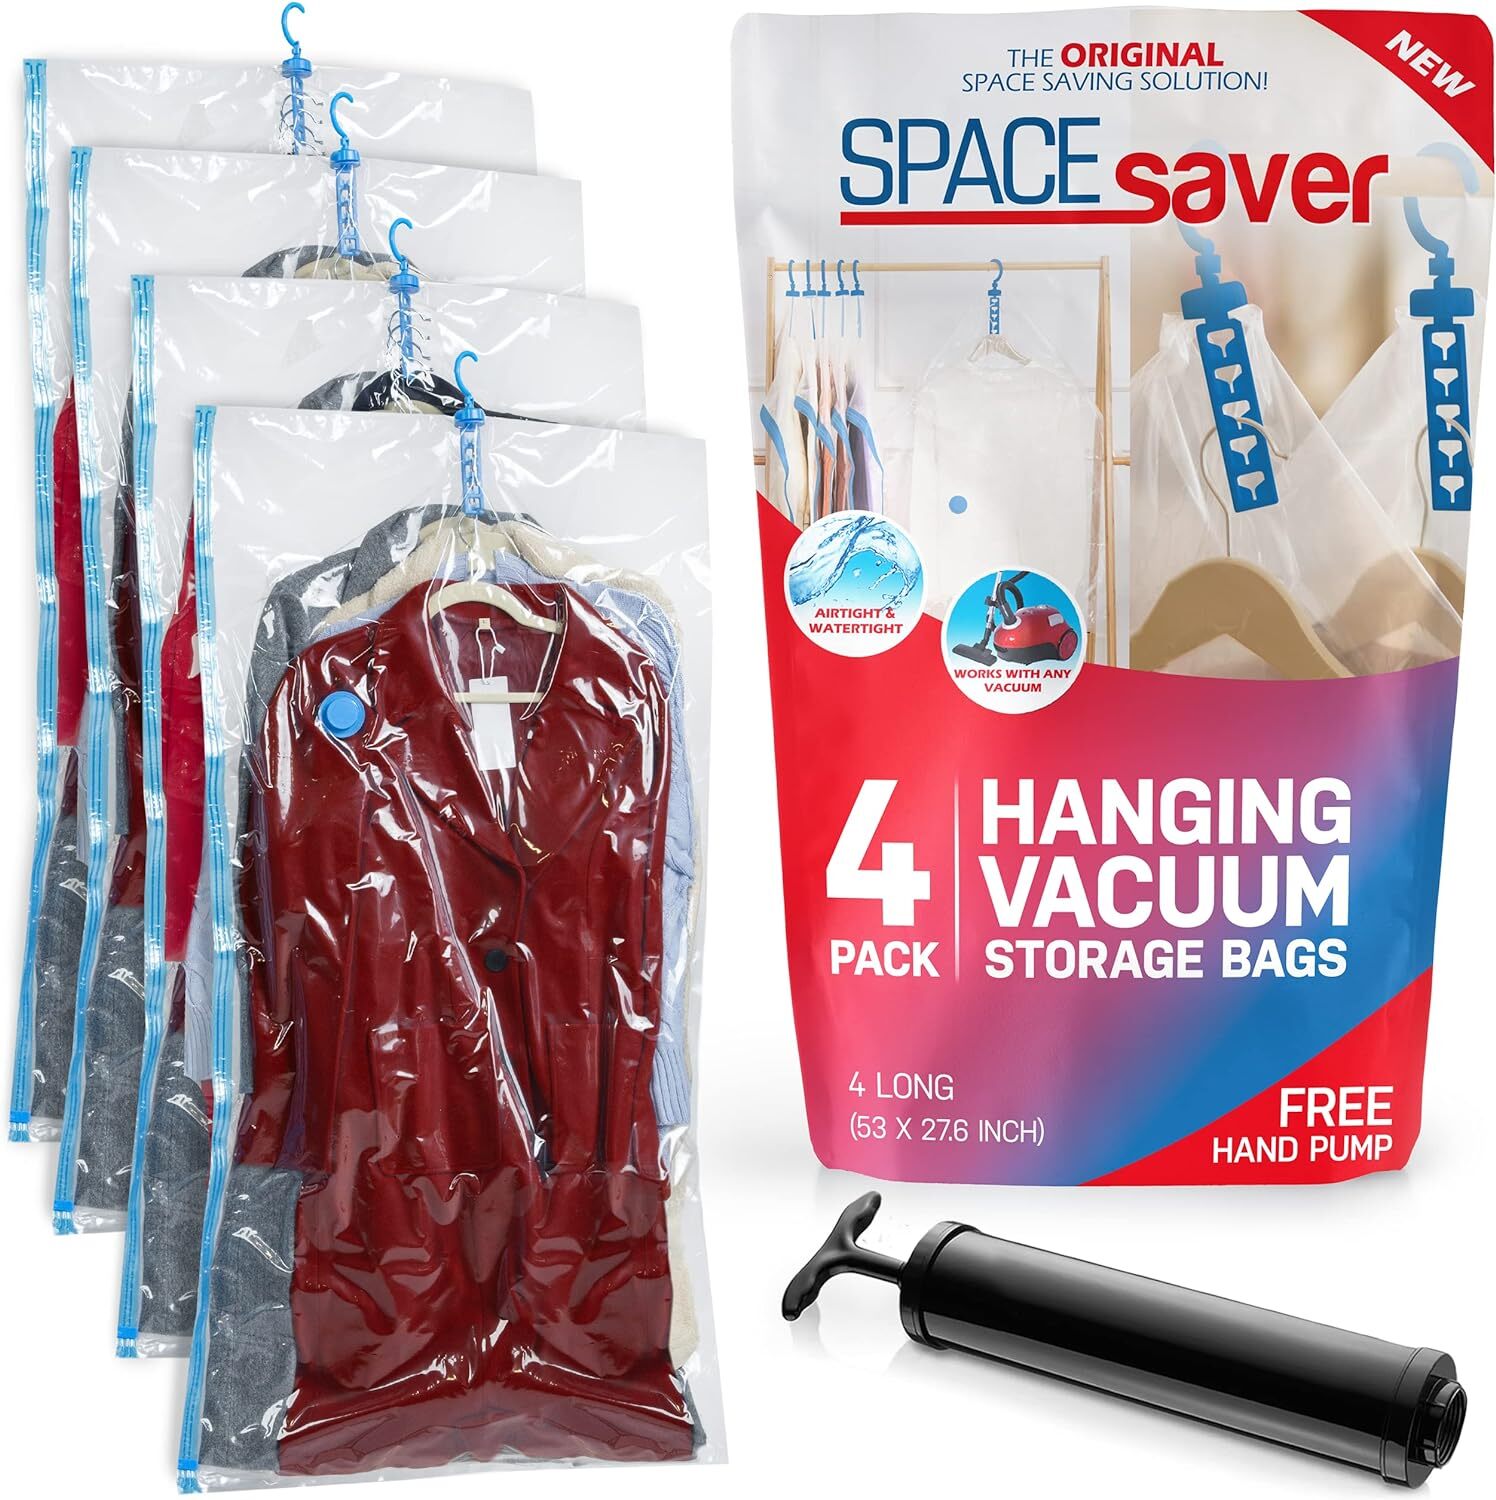 Four vacuum-sealed storage bags with pump, advertised for hanging clothes to save space